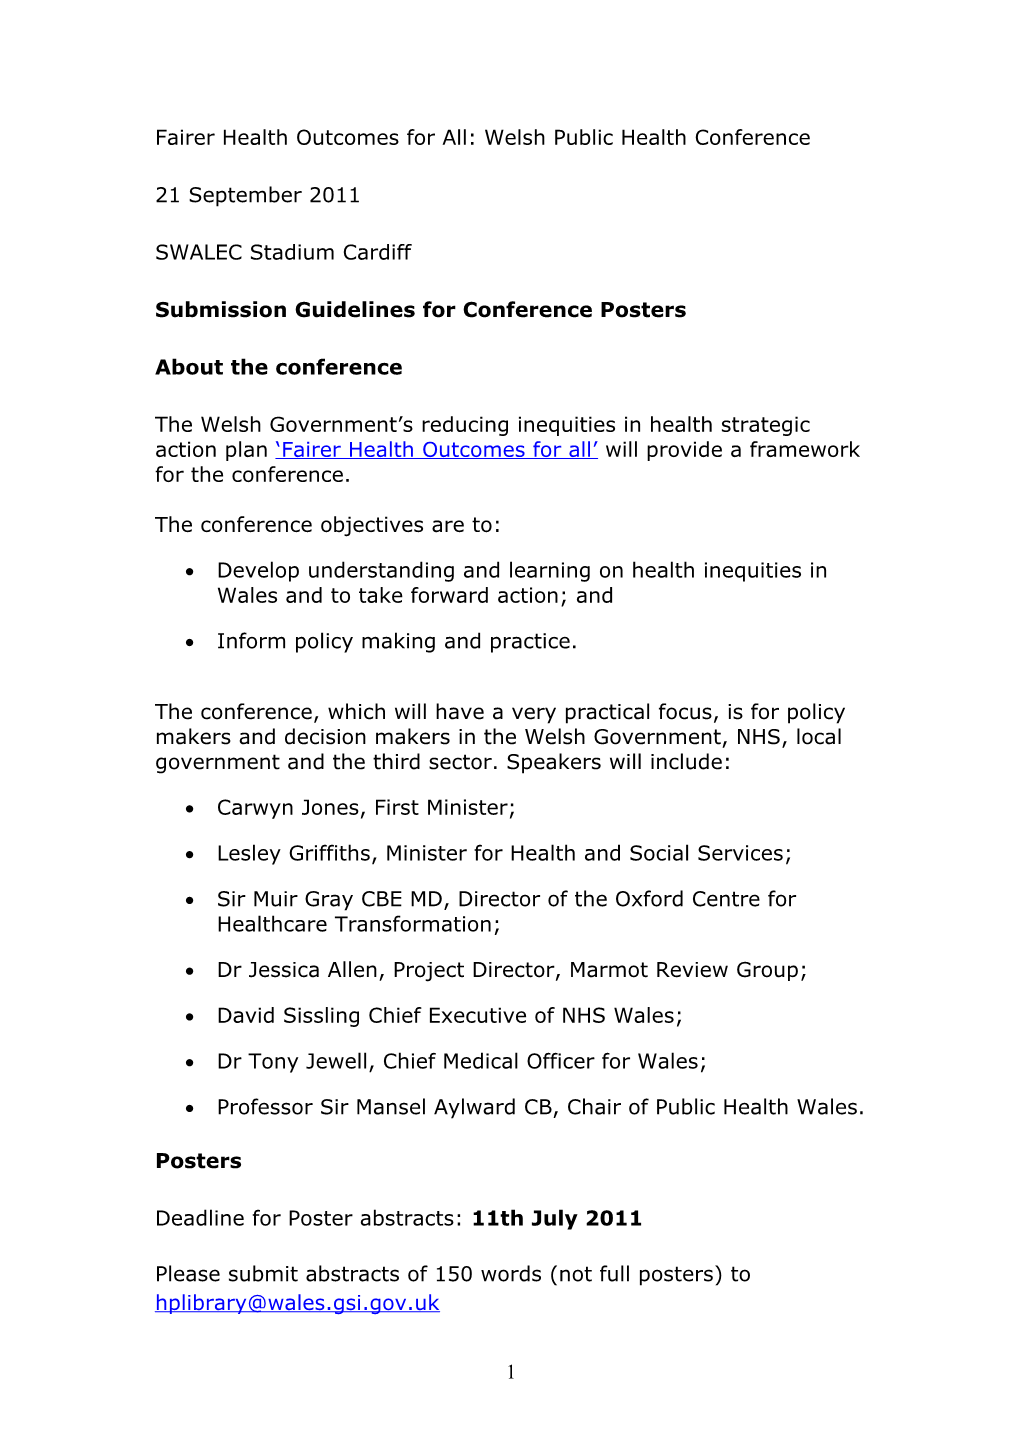 Fairer Health Outcomes for All: the Annual Welsh Public Health Conference 21St September